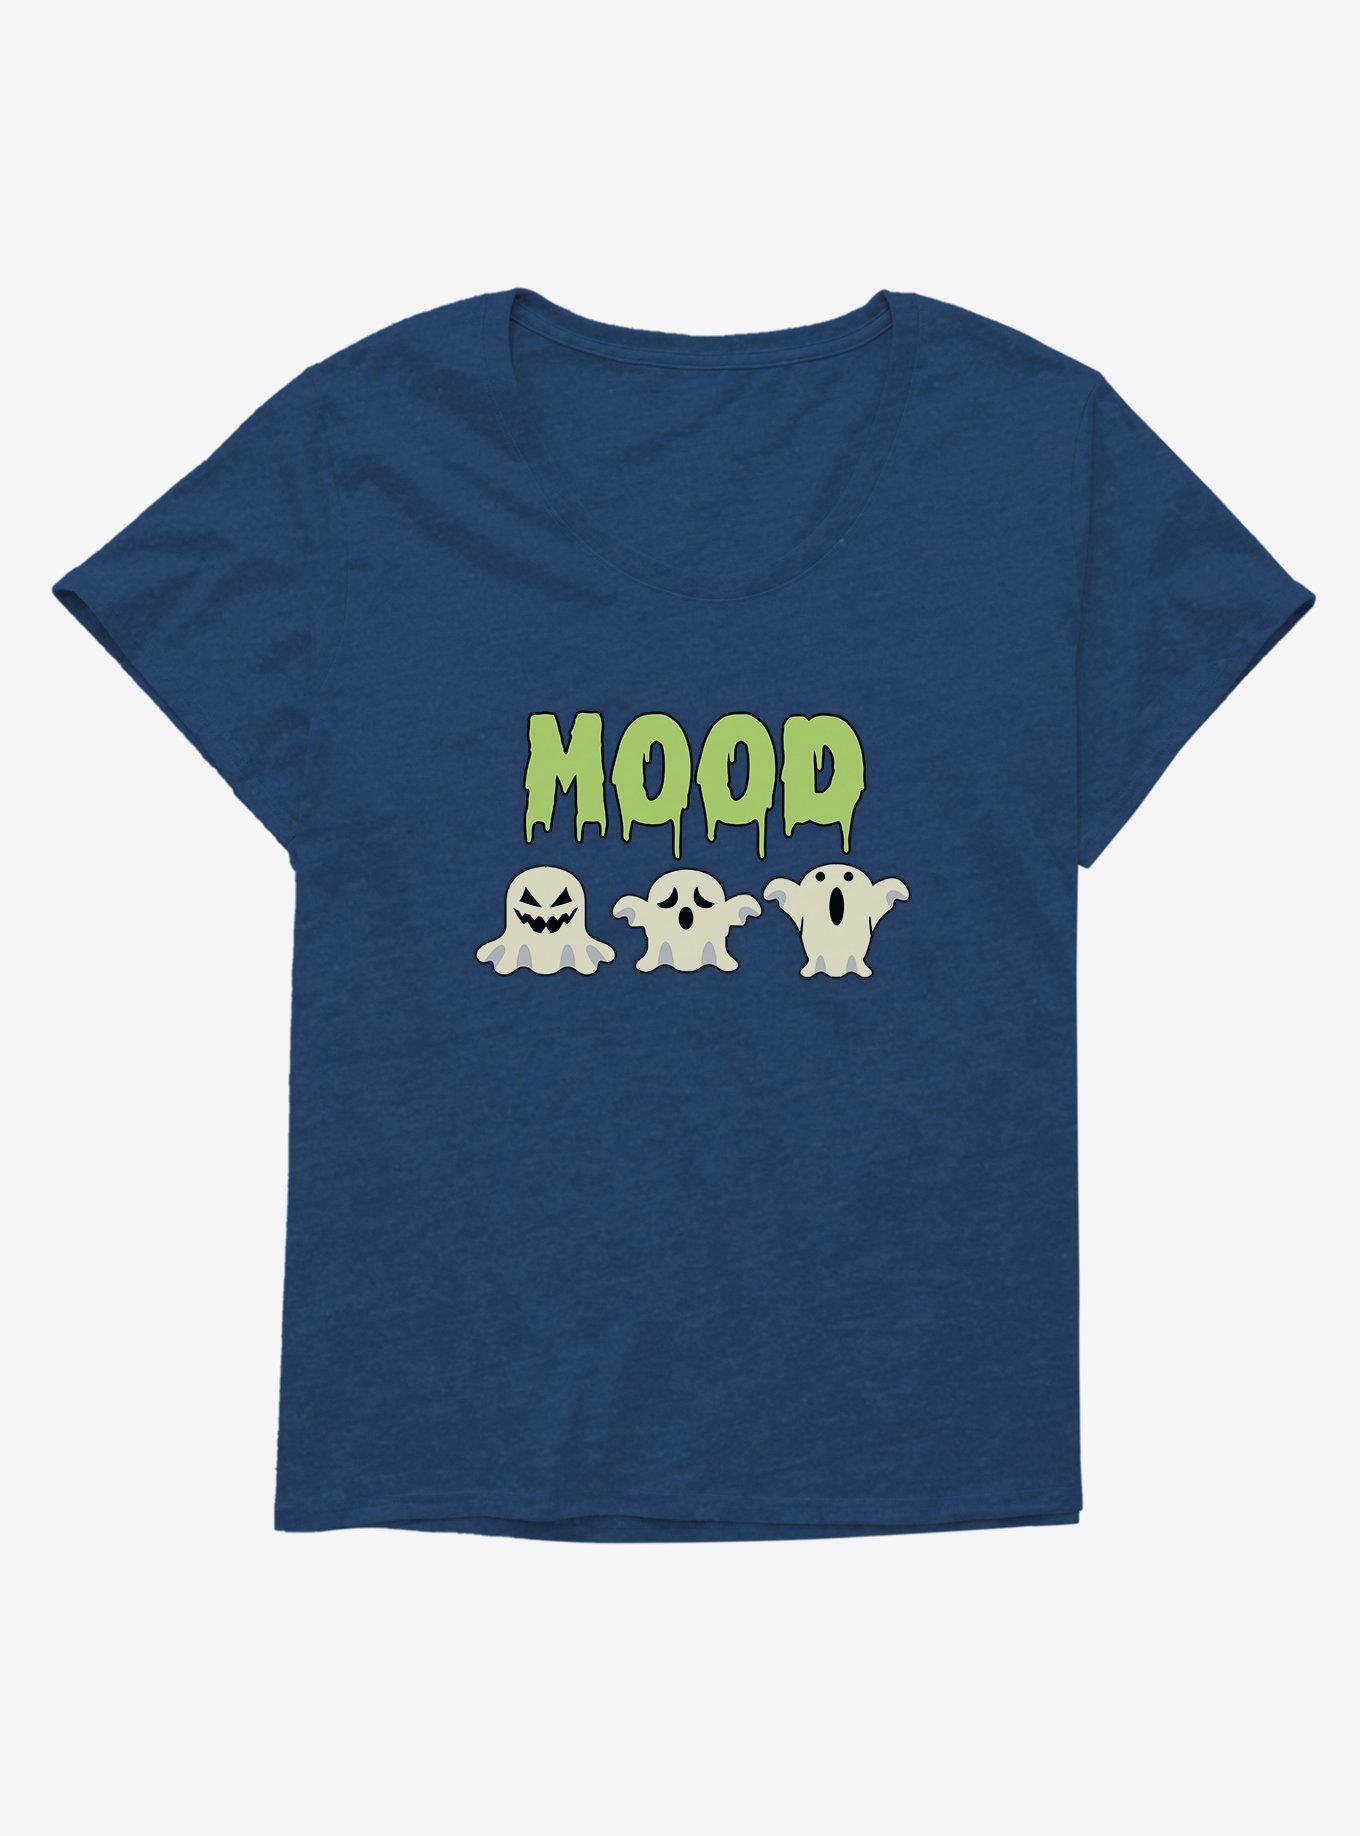 Halloween Spooky Mood Girls Plus Size T-Shirt, ATHLETIC NAVY, hi-res